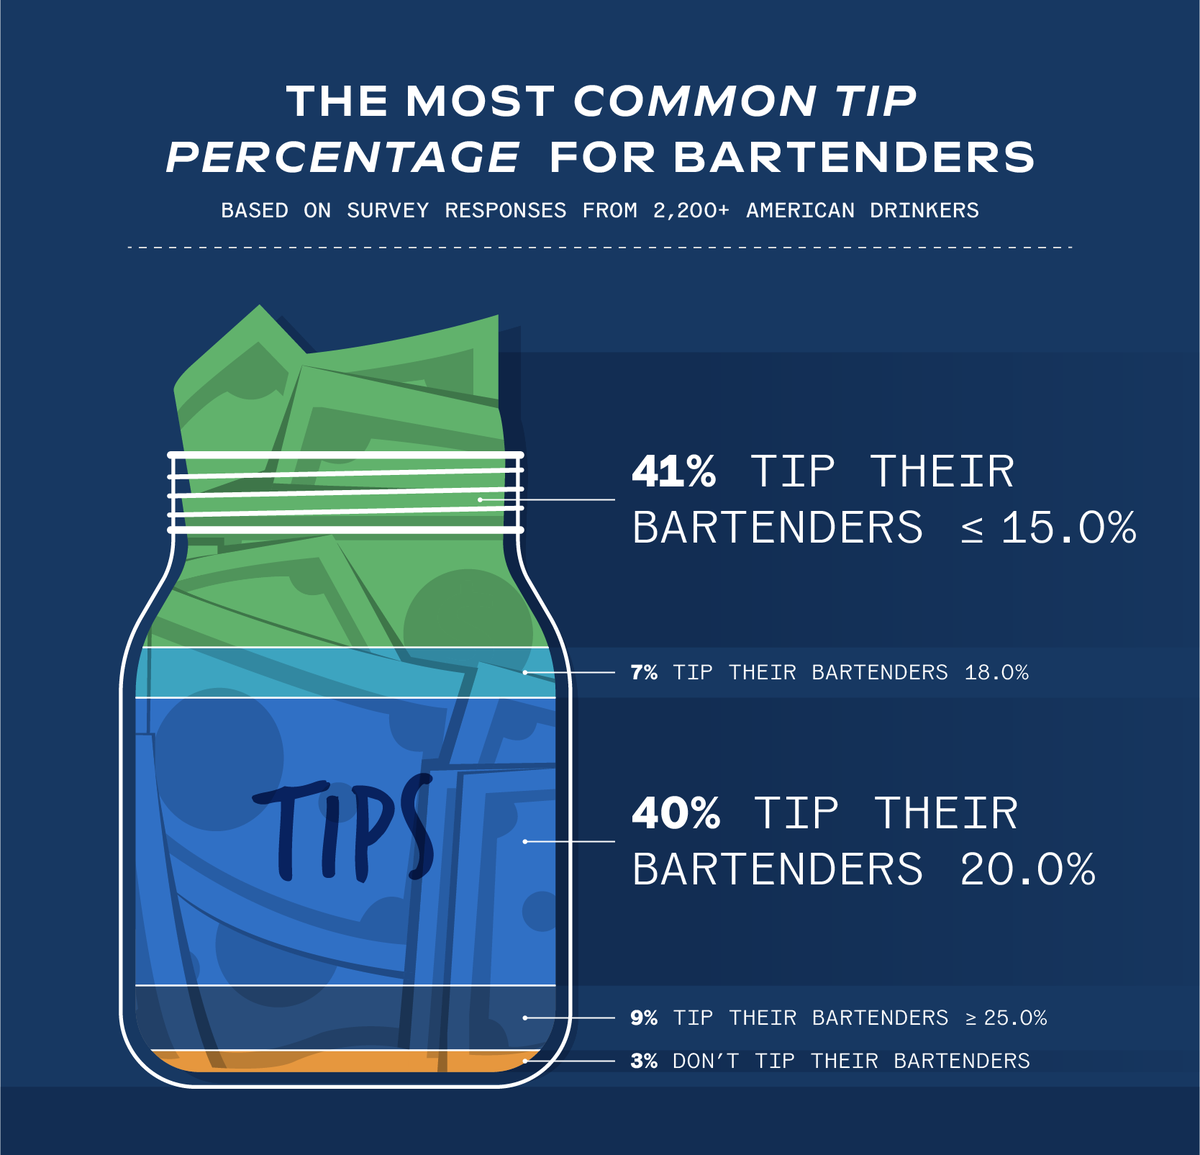 a tip jar pie chart showing the most common tip percentage for bartenders